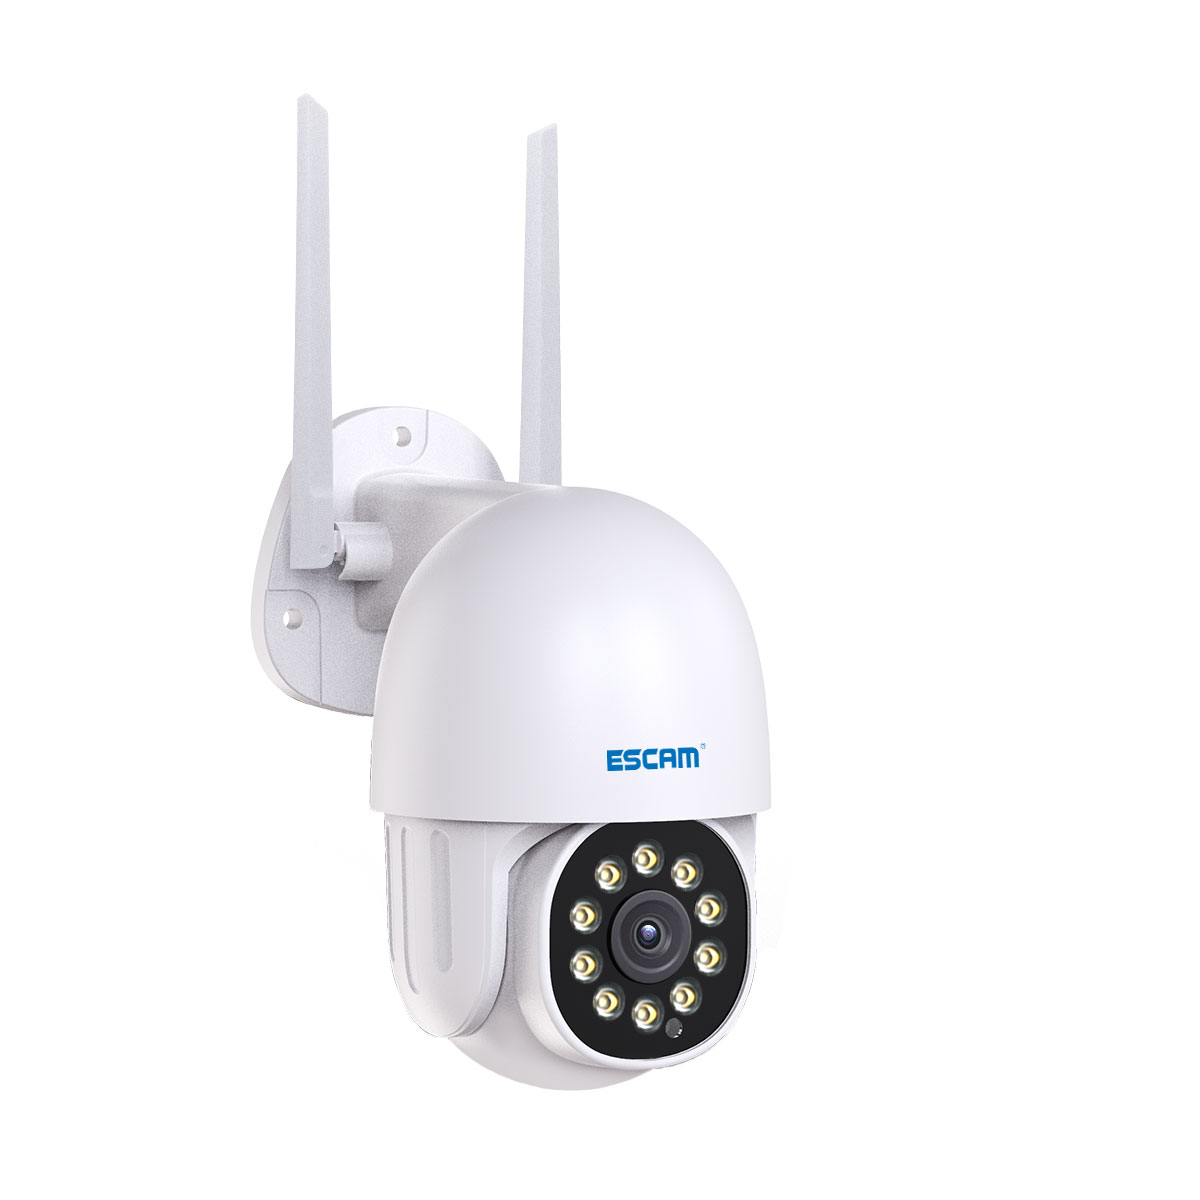 ESCAM-PT202-1080P-WiFi-IP-Camera-Infrared-Night-Vision-Waterproof-With-Motions-Detection-And-Automat-1784296-13